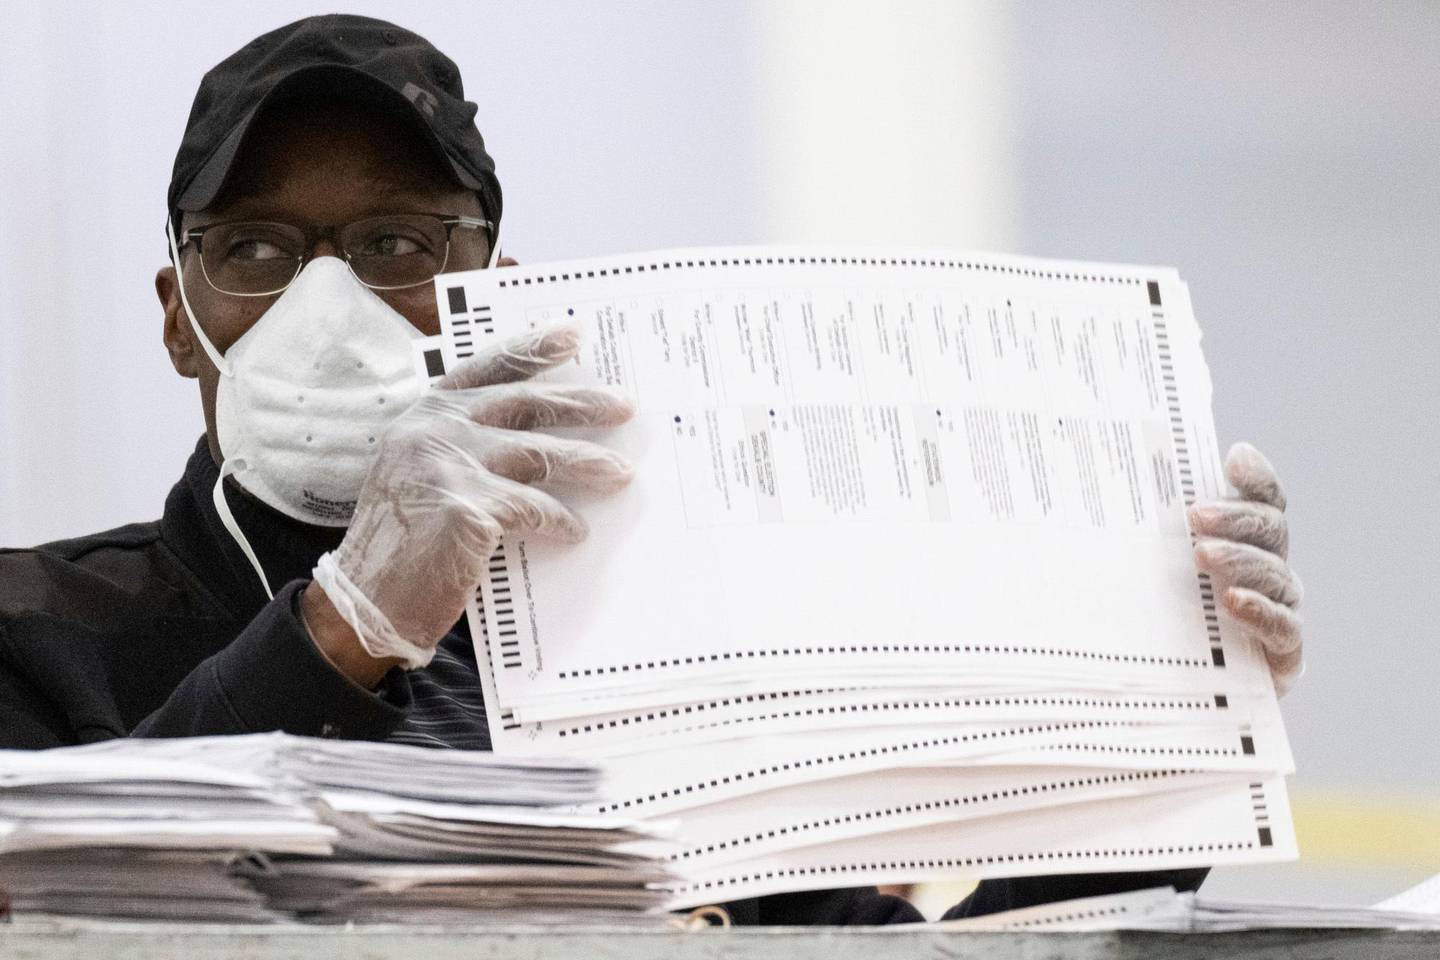 Workers sort and stack ballots in preparation for scanning during a recount, Tuesday, Nov. 24, 2020, in Lithonia, Ga. County election workers across Georgia have begun an official machine recount of the roughly 5 million votes cast in the presidential race in the state. The recount was requested by President Donald Trump after certified results showed him losing the state to Democrat Joe Biden by 12,670 votes, or 0.25%   (AP Photo/Ben Gray)